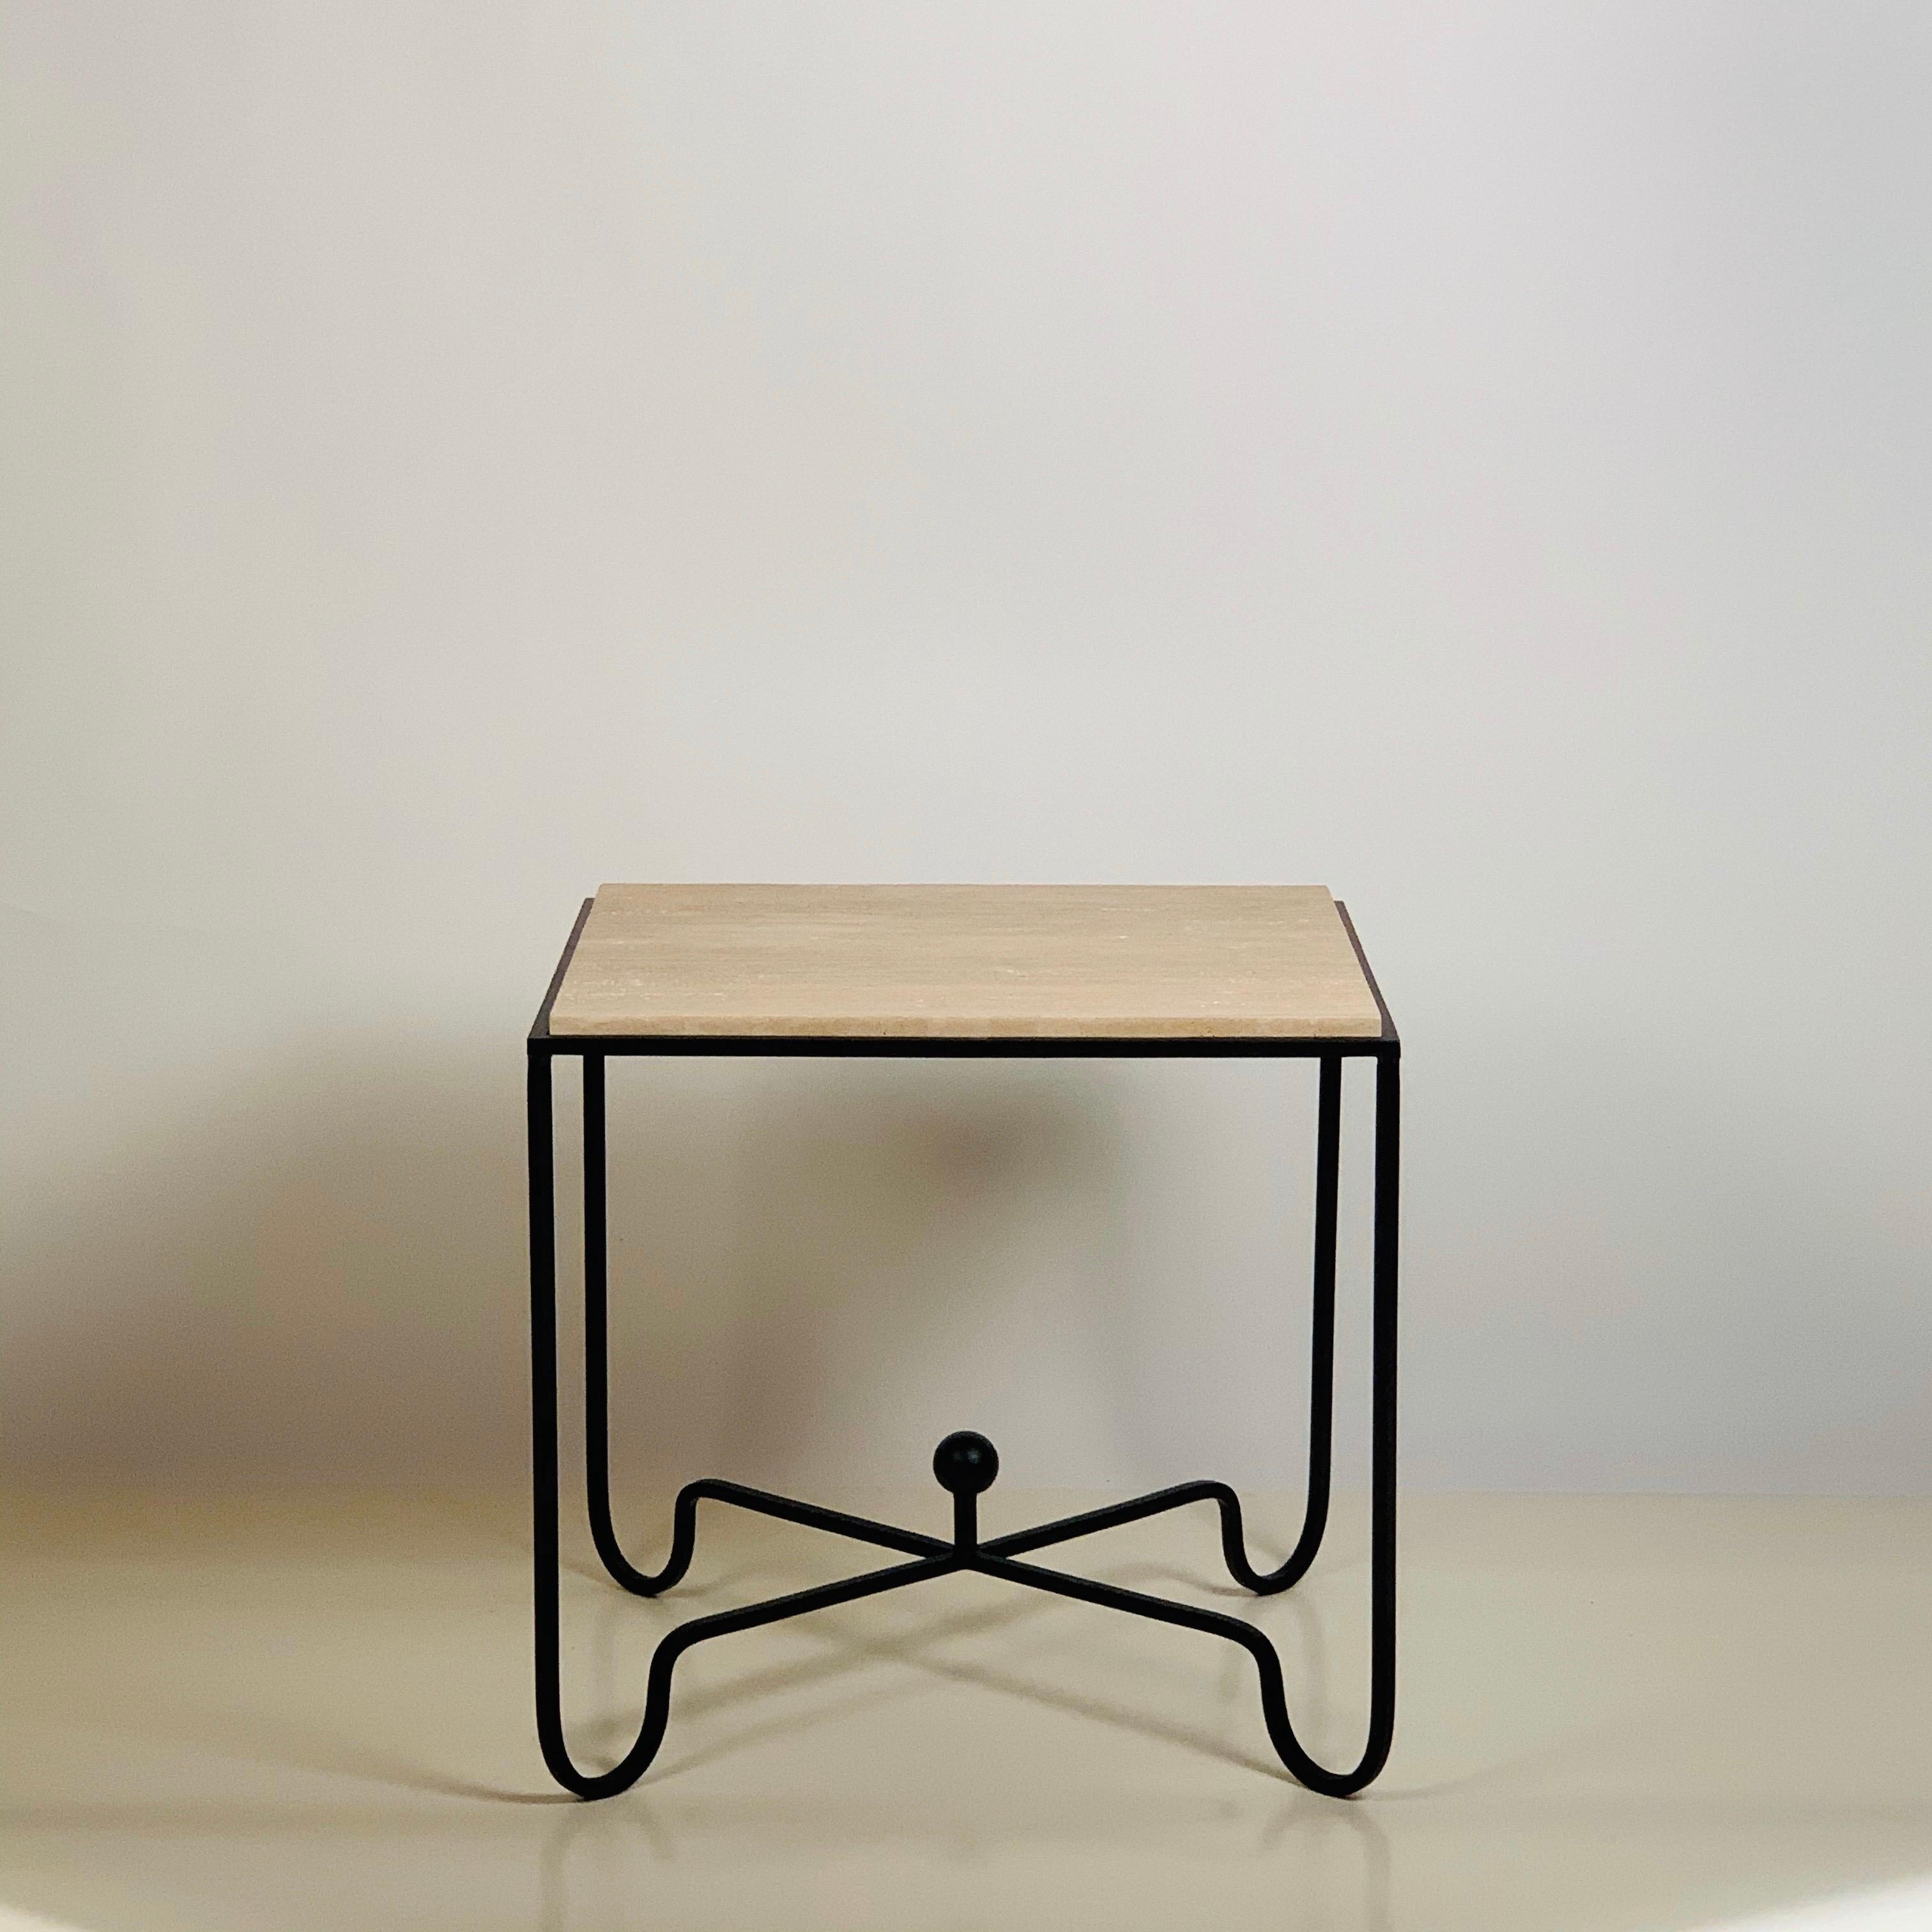 Organic Modern Large ‘Entretoise’ Grooved Travertine Side Table or Nightstand by Design Frères